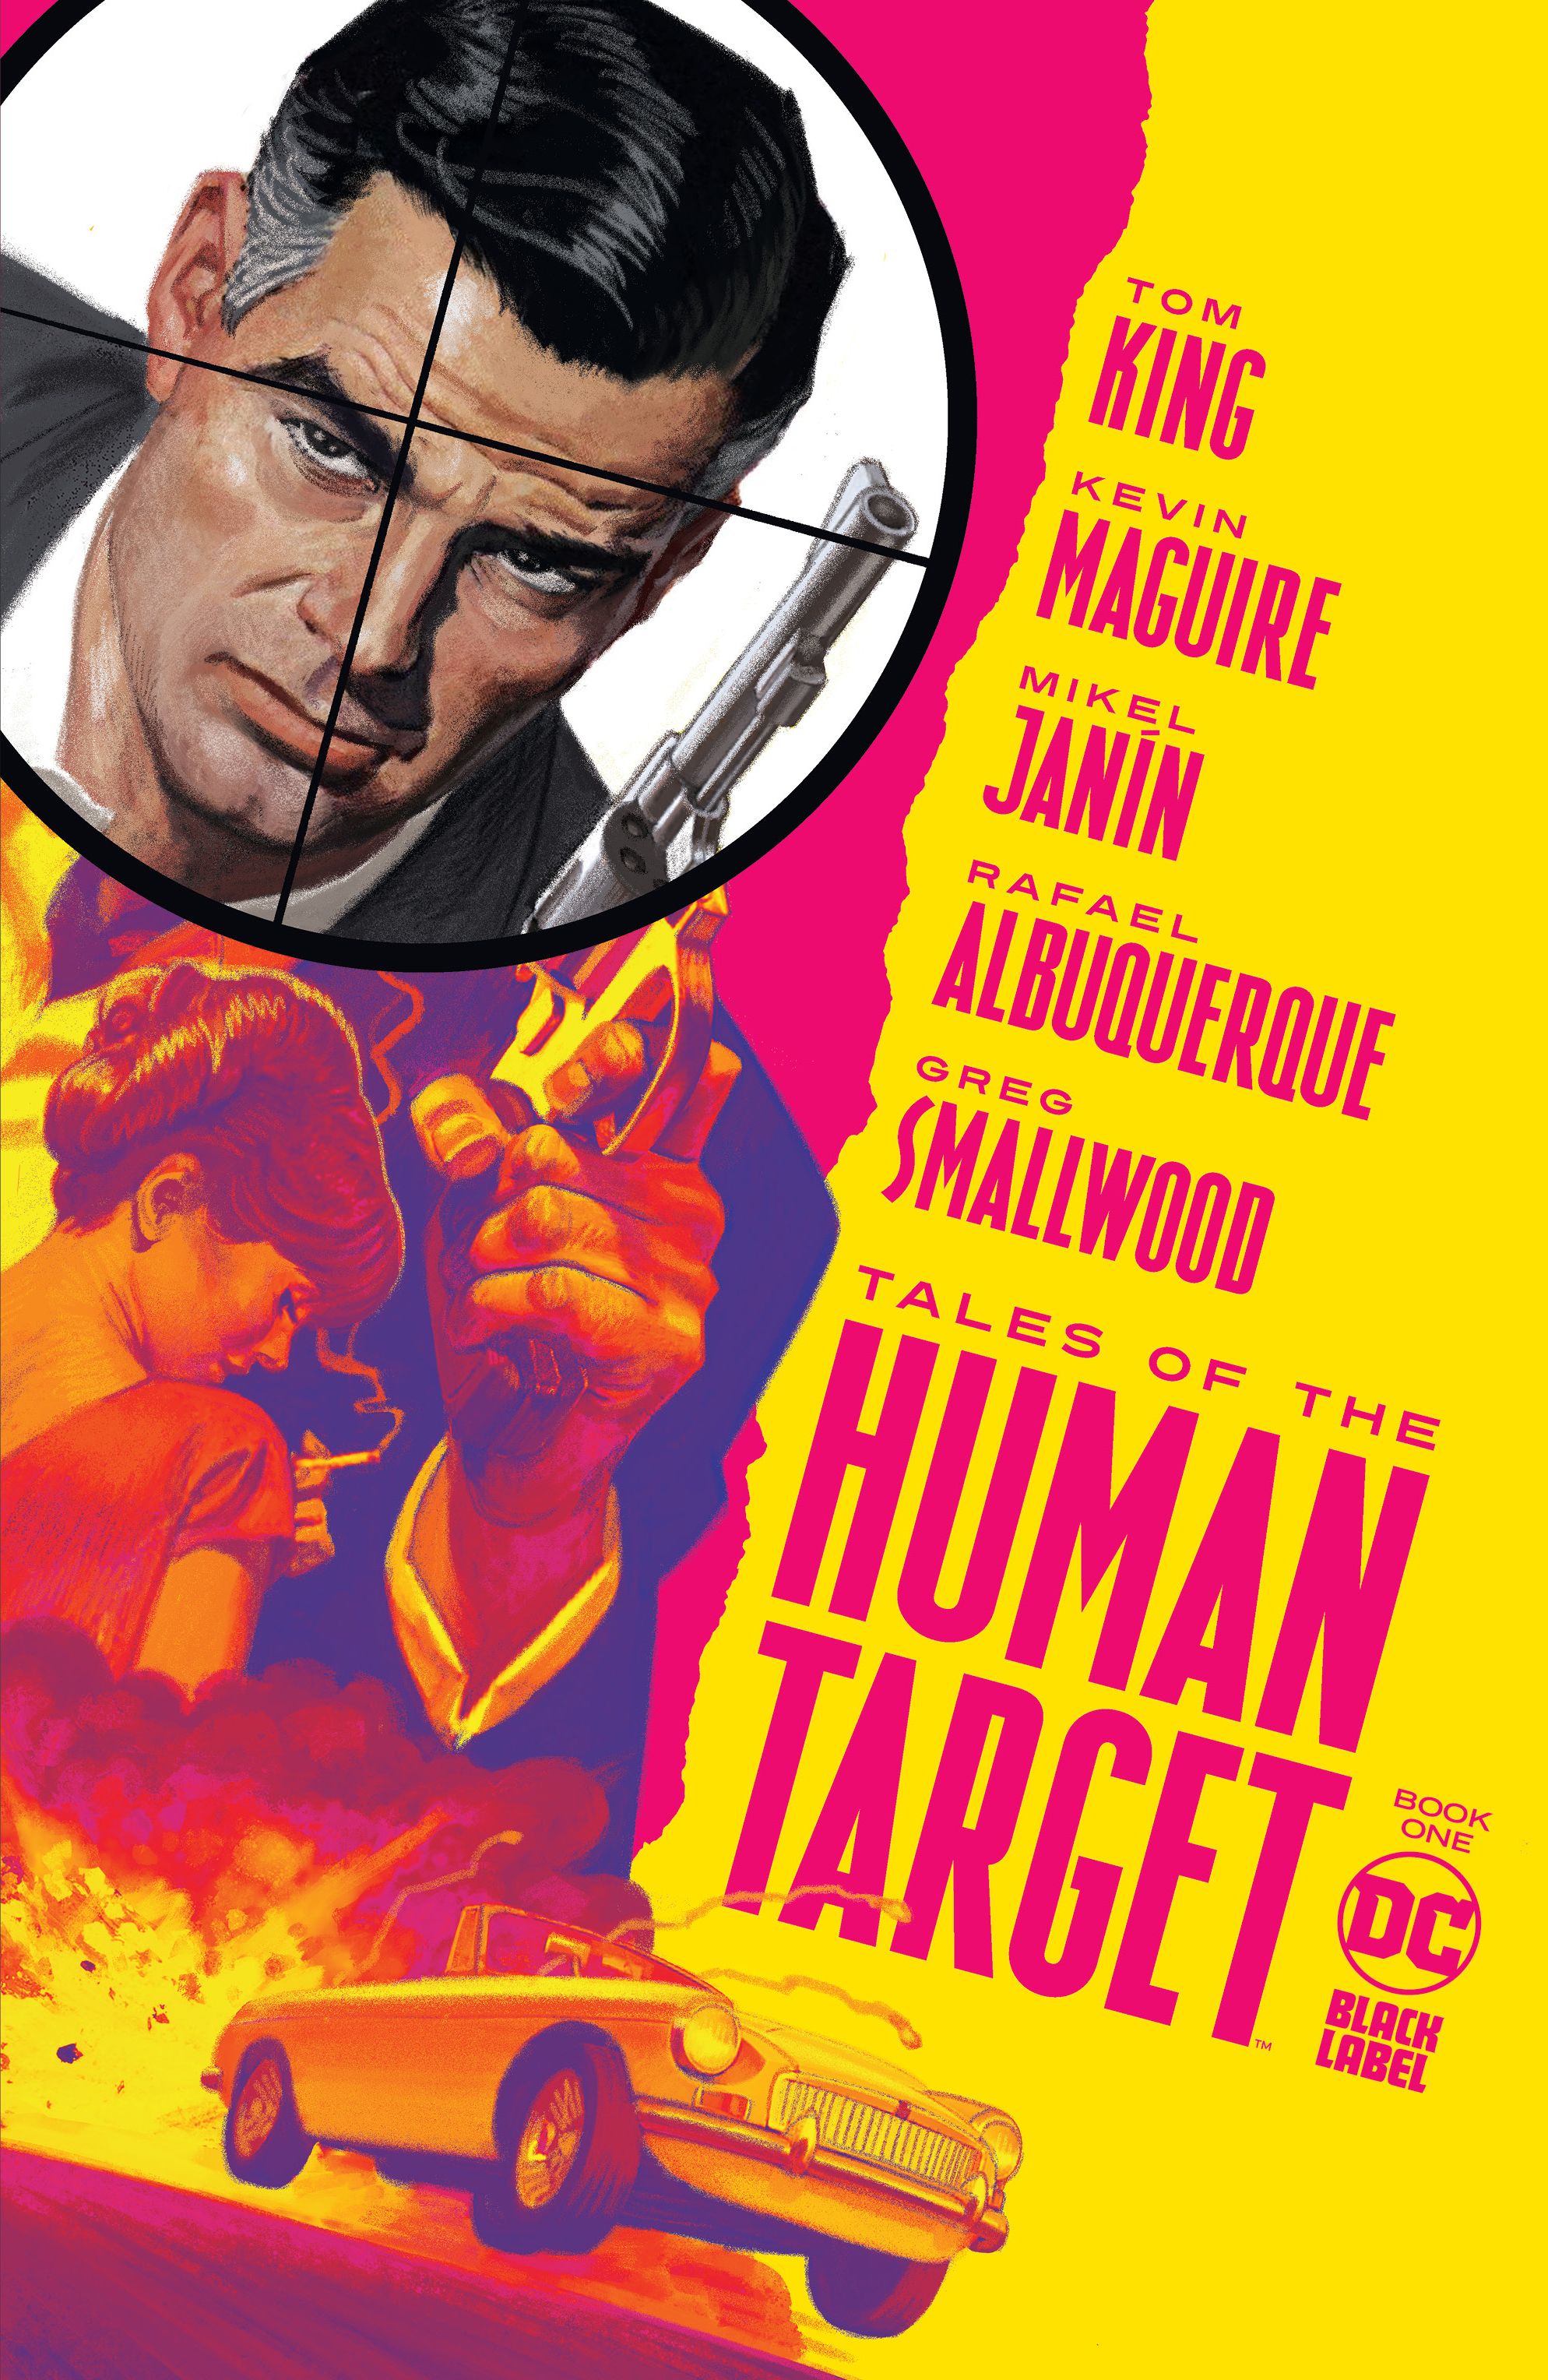 Tales of The Human Target #1 Comic